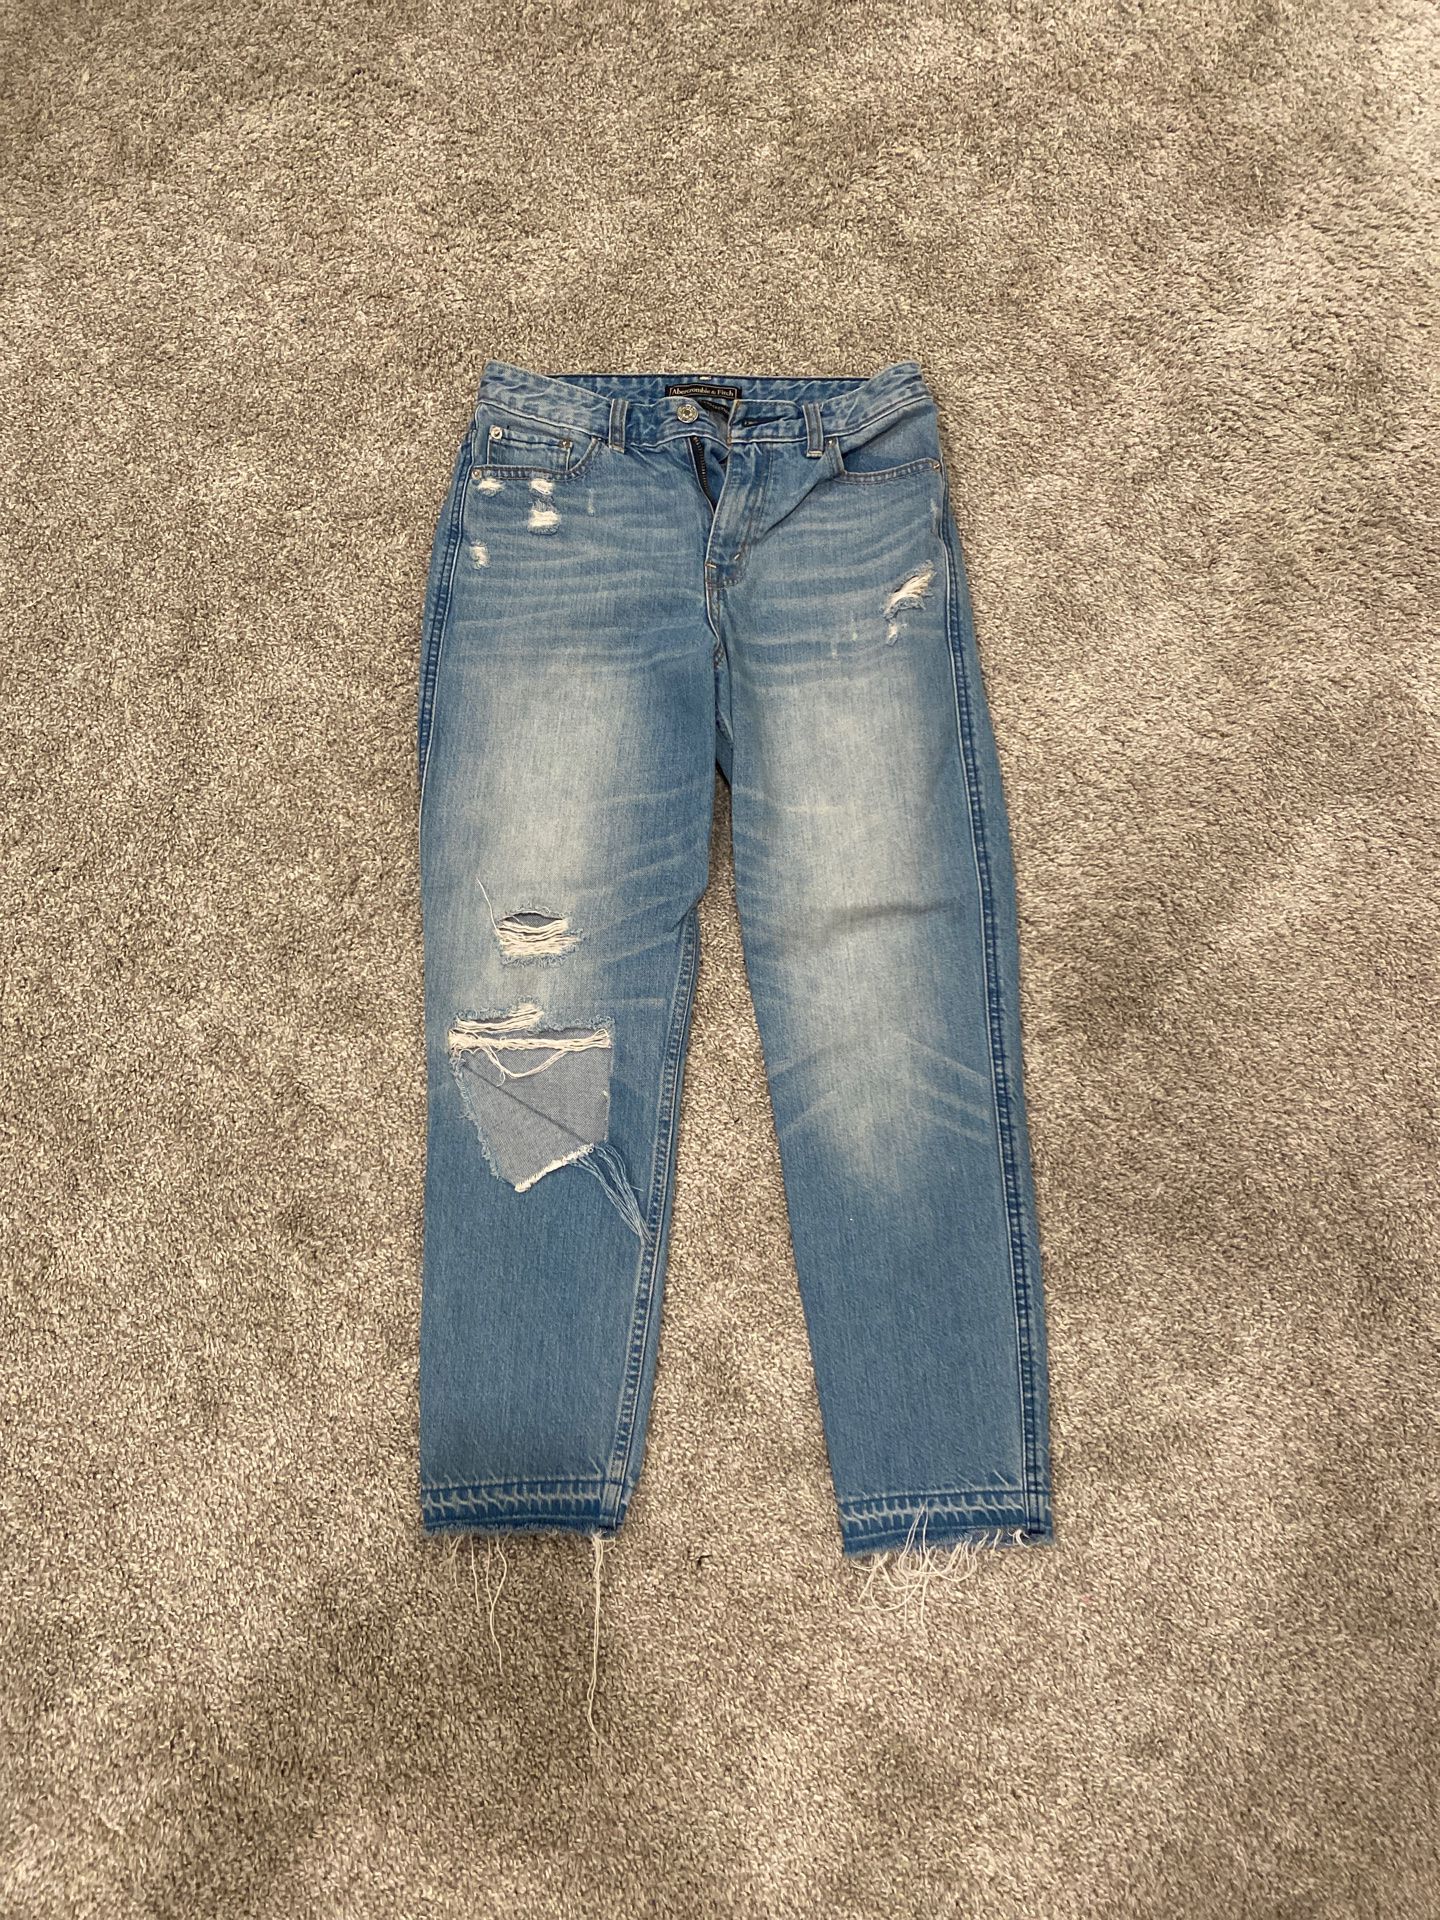 Abercrombie & Fitch boyfriend style light washed ripped jeans. Size: 26, length 27